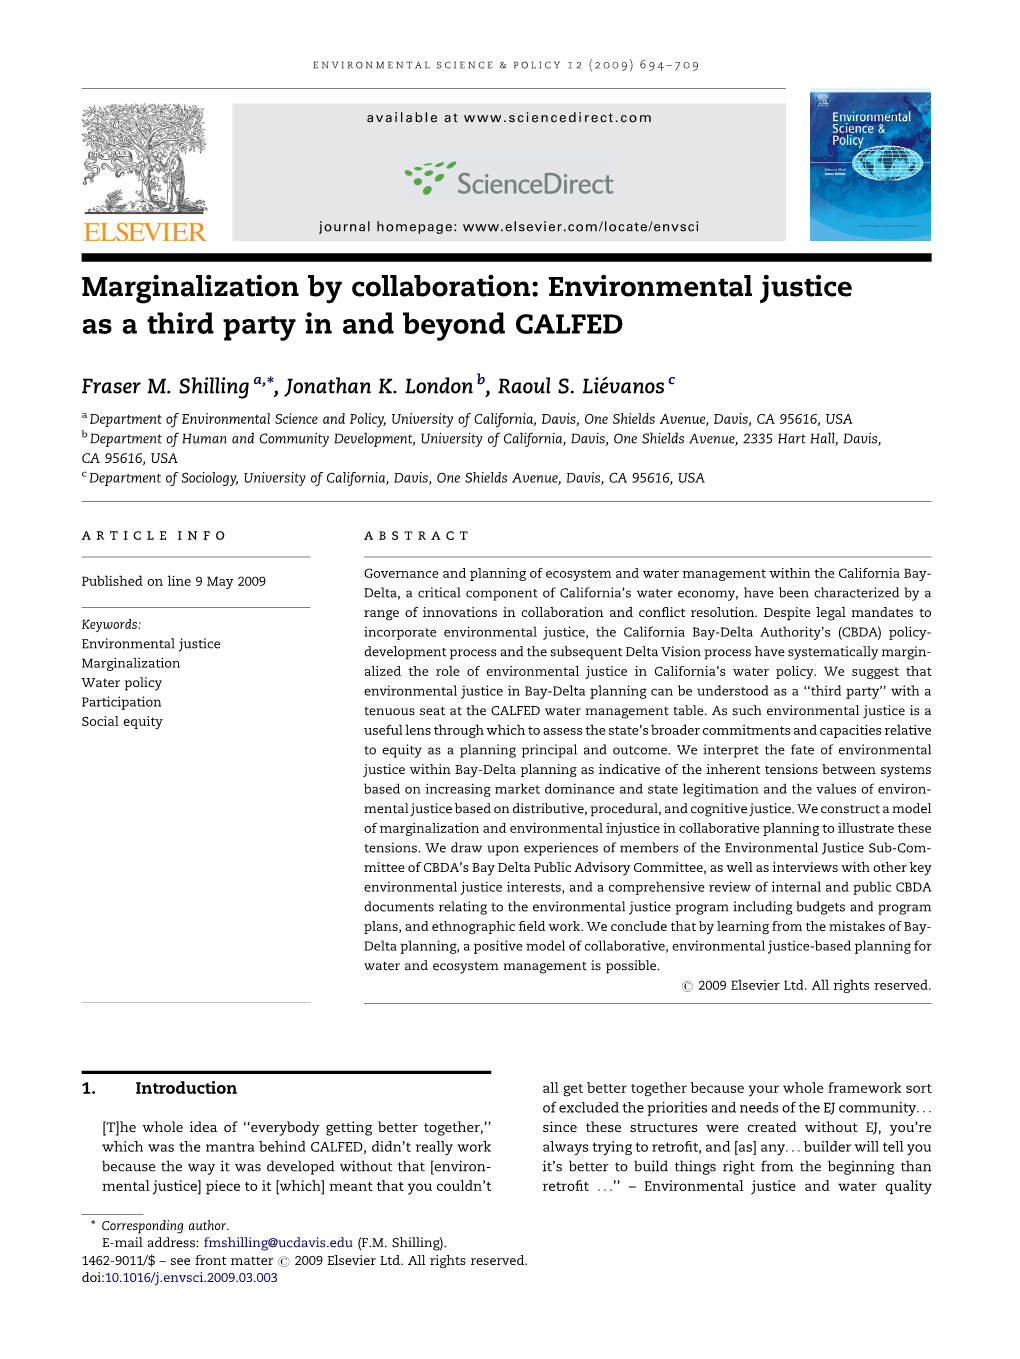 Marginalization by Collaboration: Environmental Justice As a Third Party in and Beyond CALFED